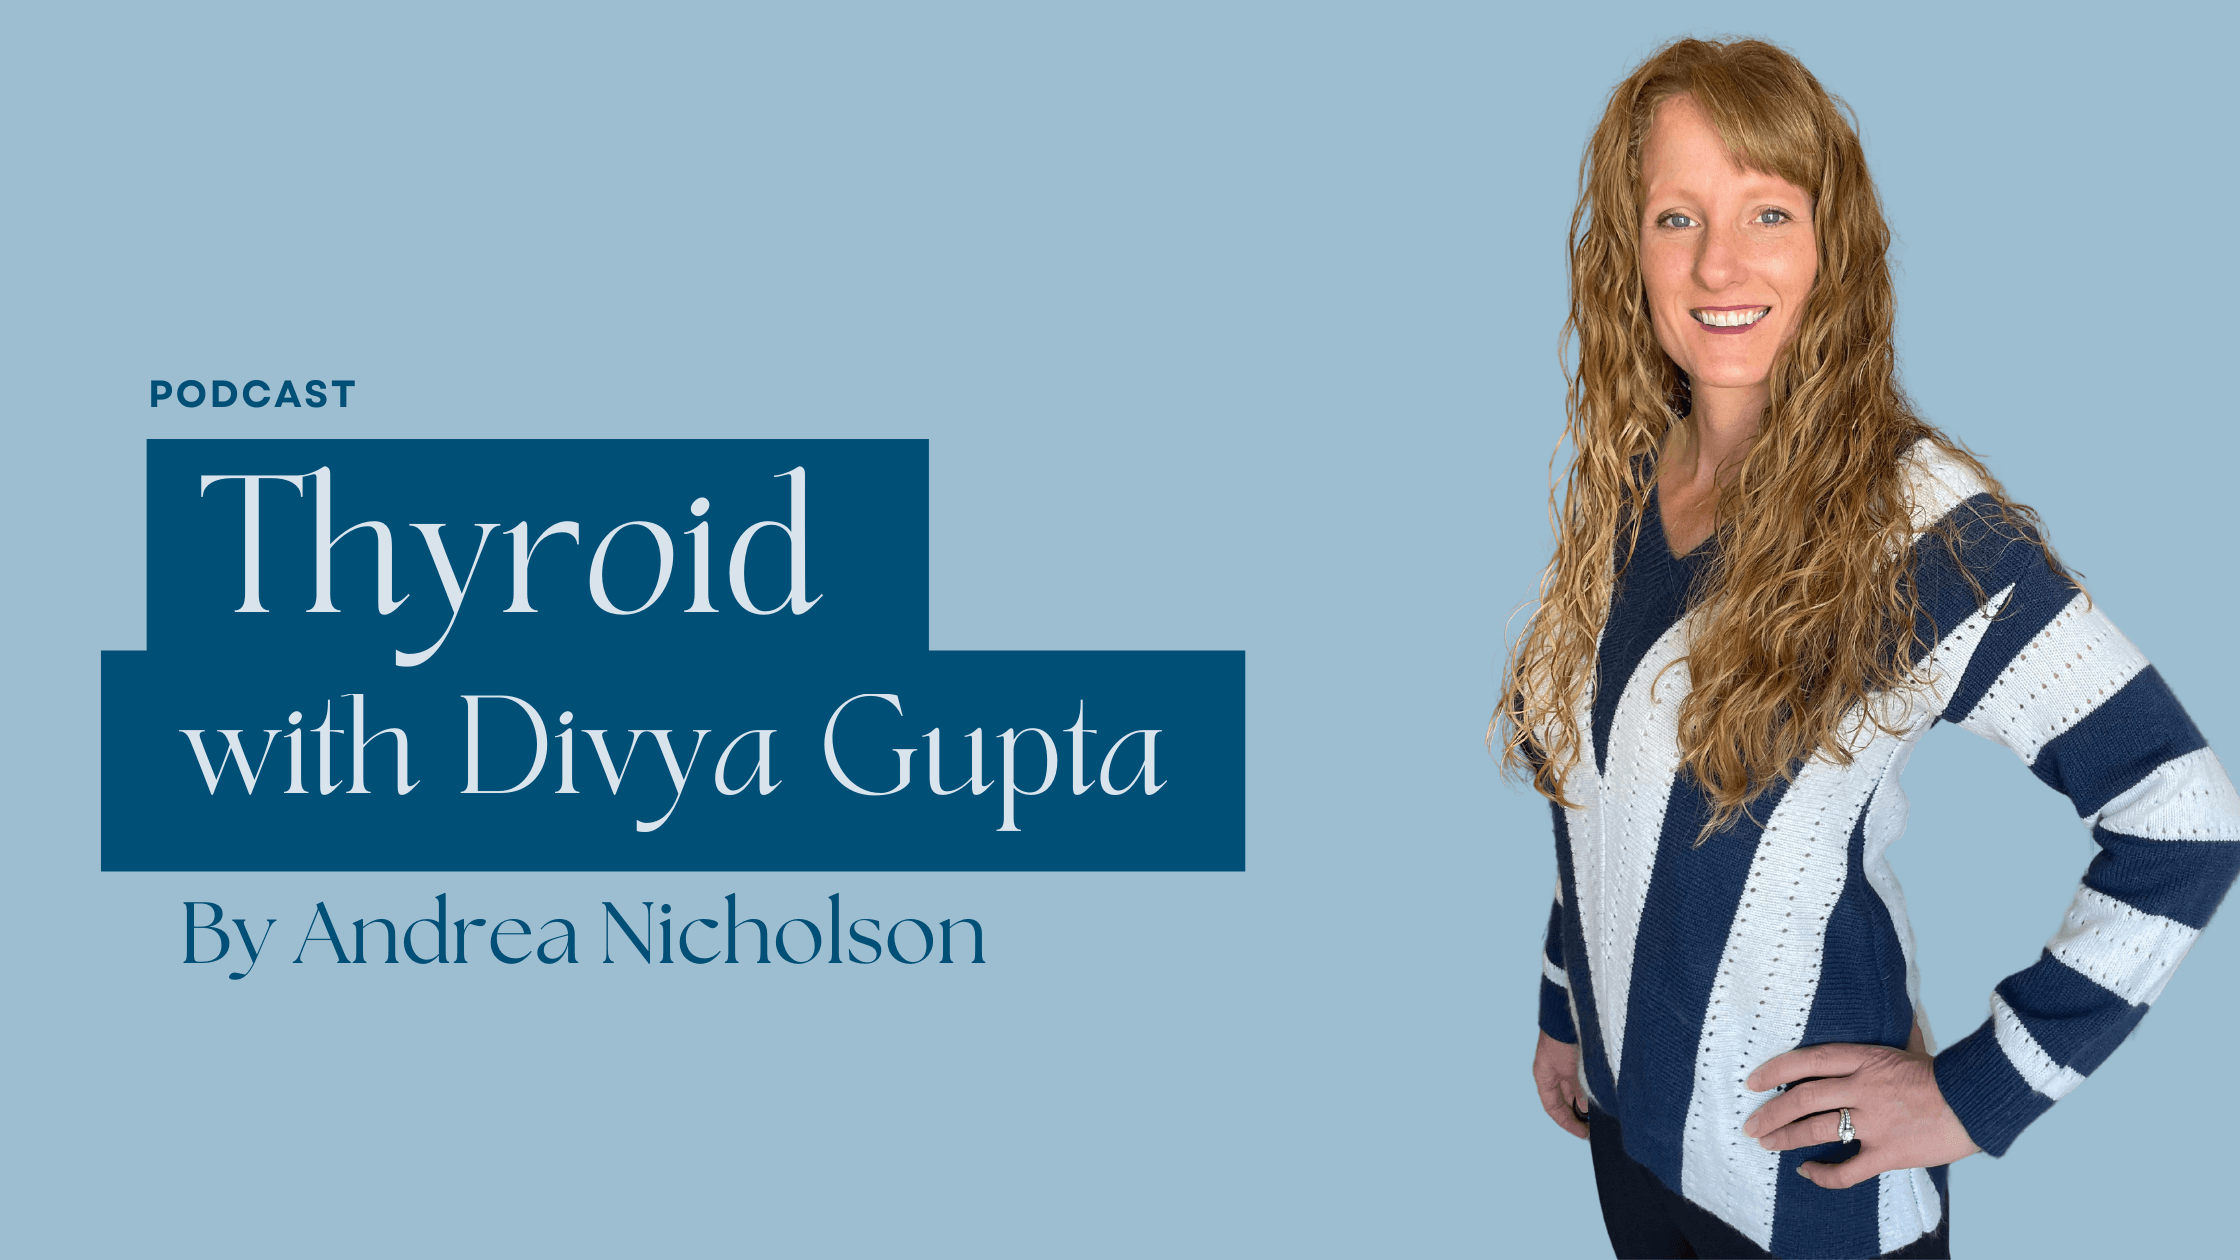 Holistic Health Bites podcast with Functional Nutritionist Andrea Nicholson featuring Divya Gupta discussing thyroid health. 